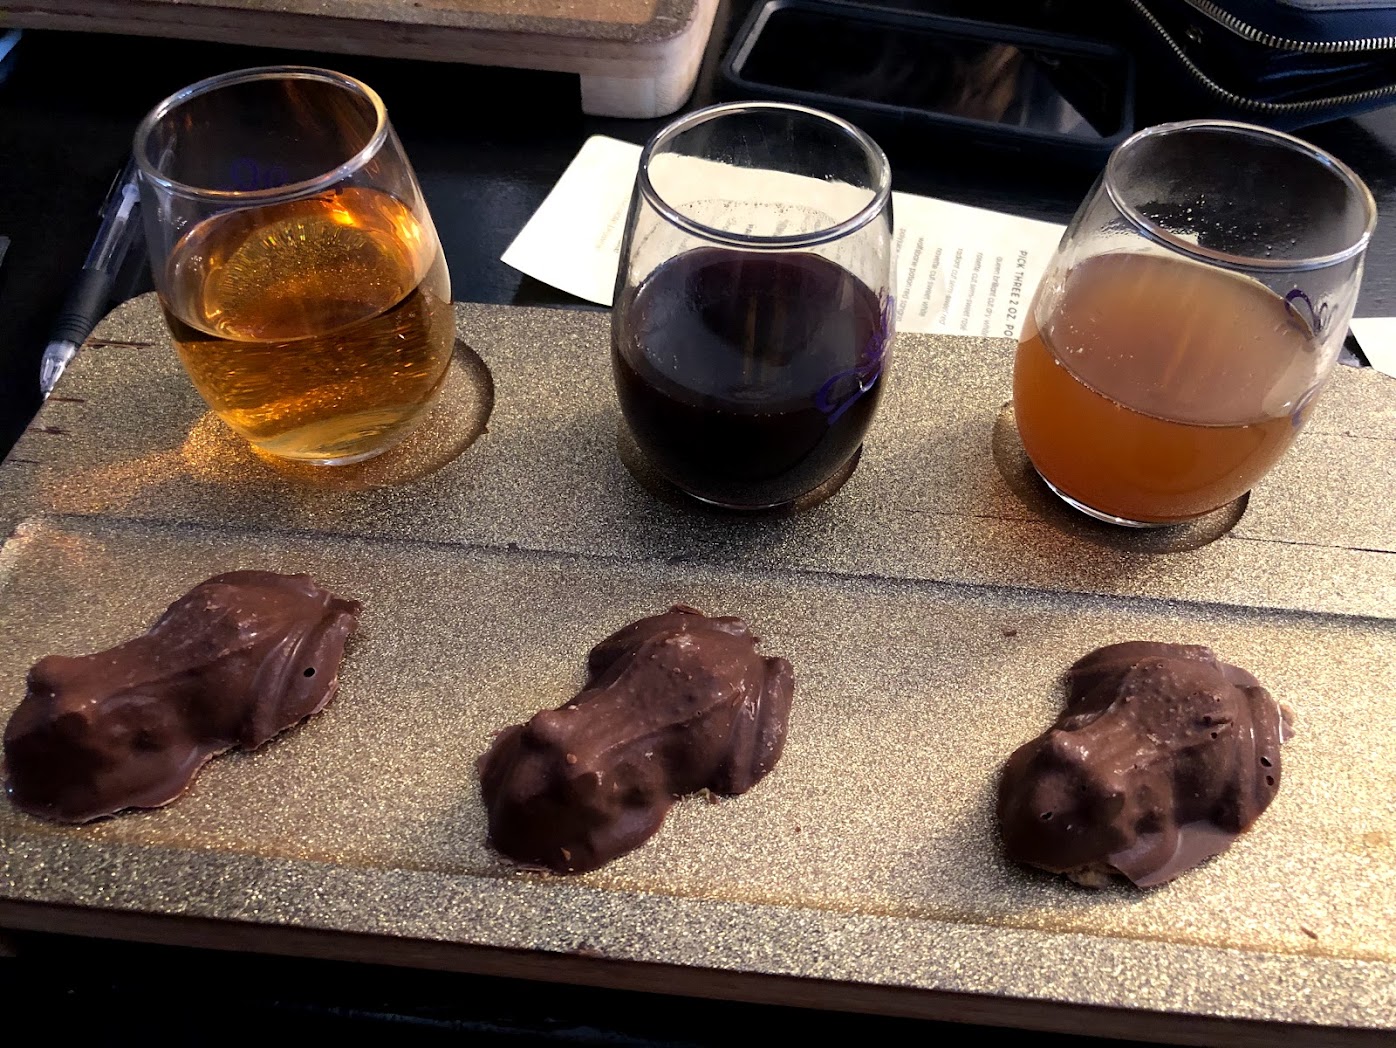 A flight of wine and chocolate frogs at Weston Wine Co. in Weston, Missouri 